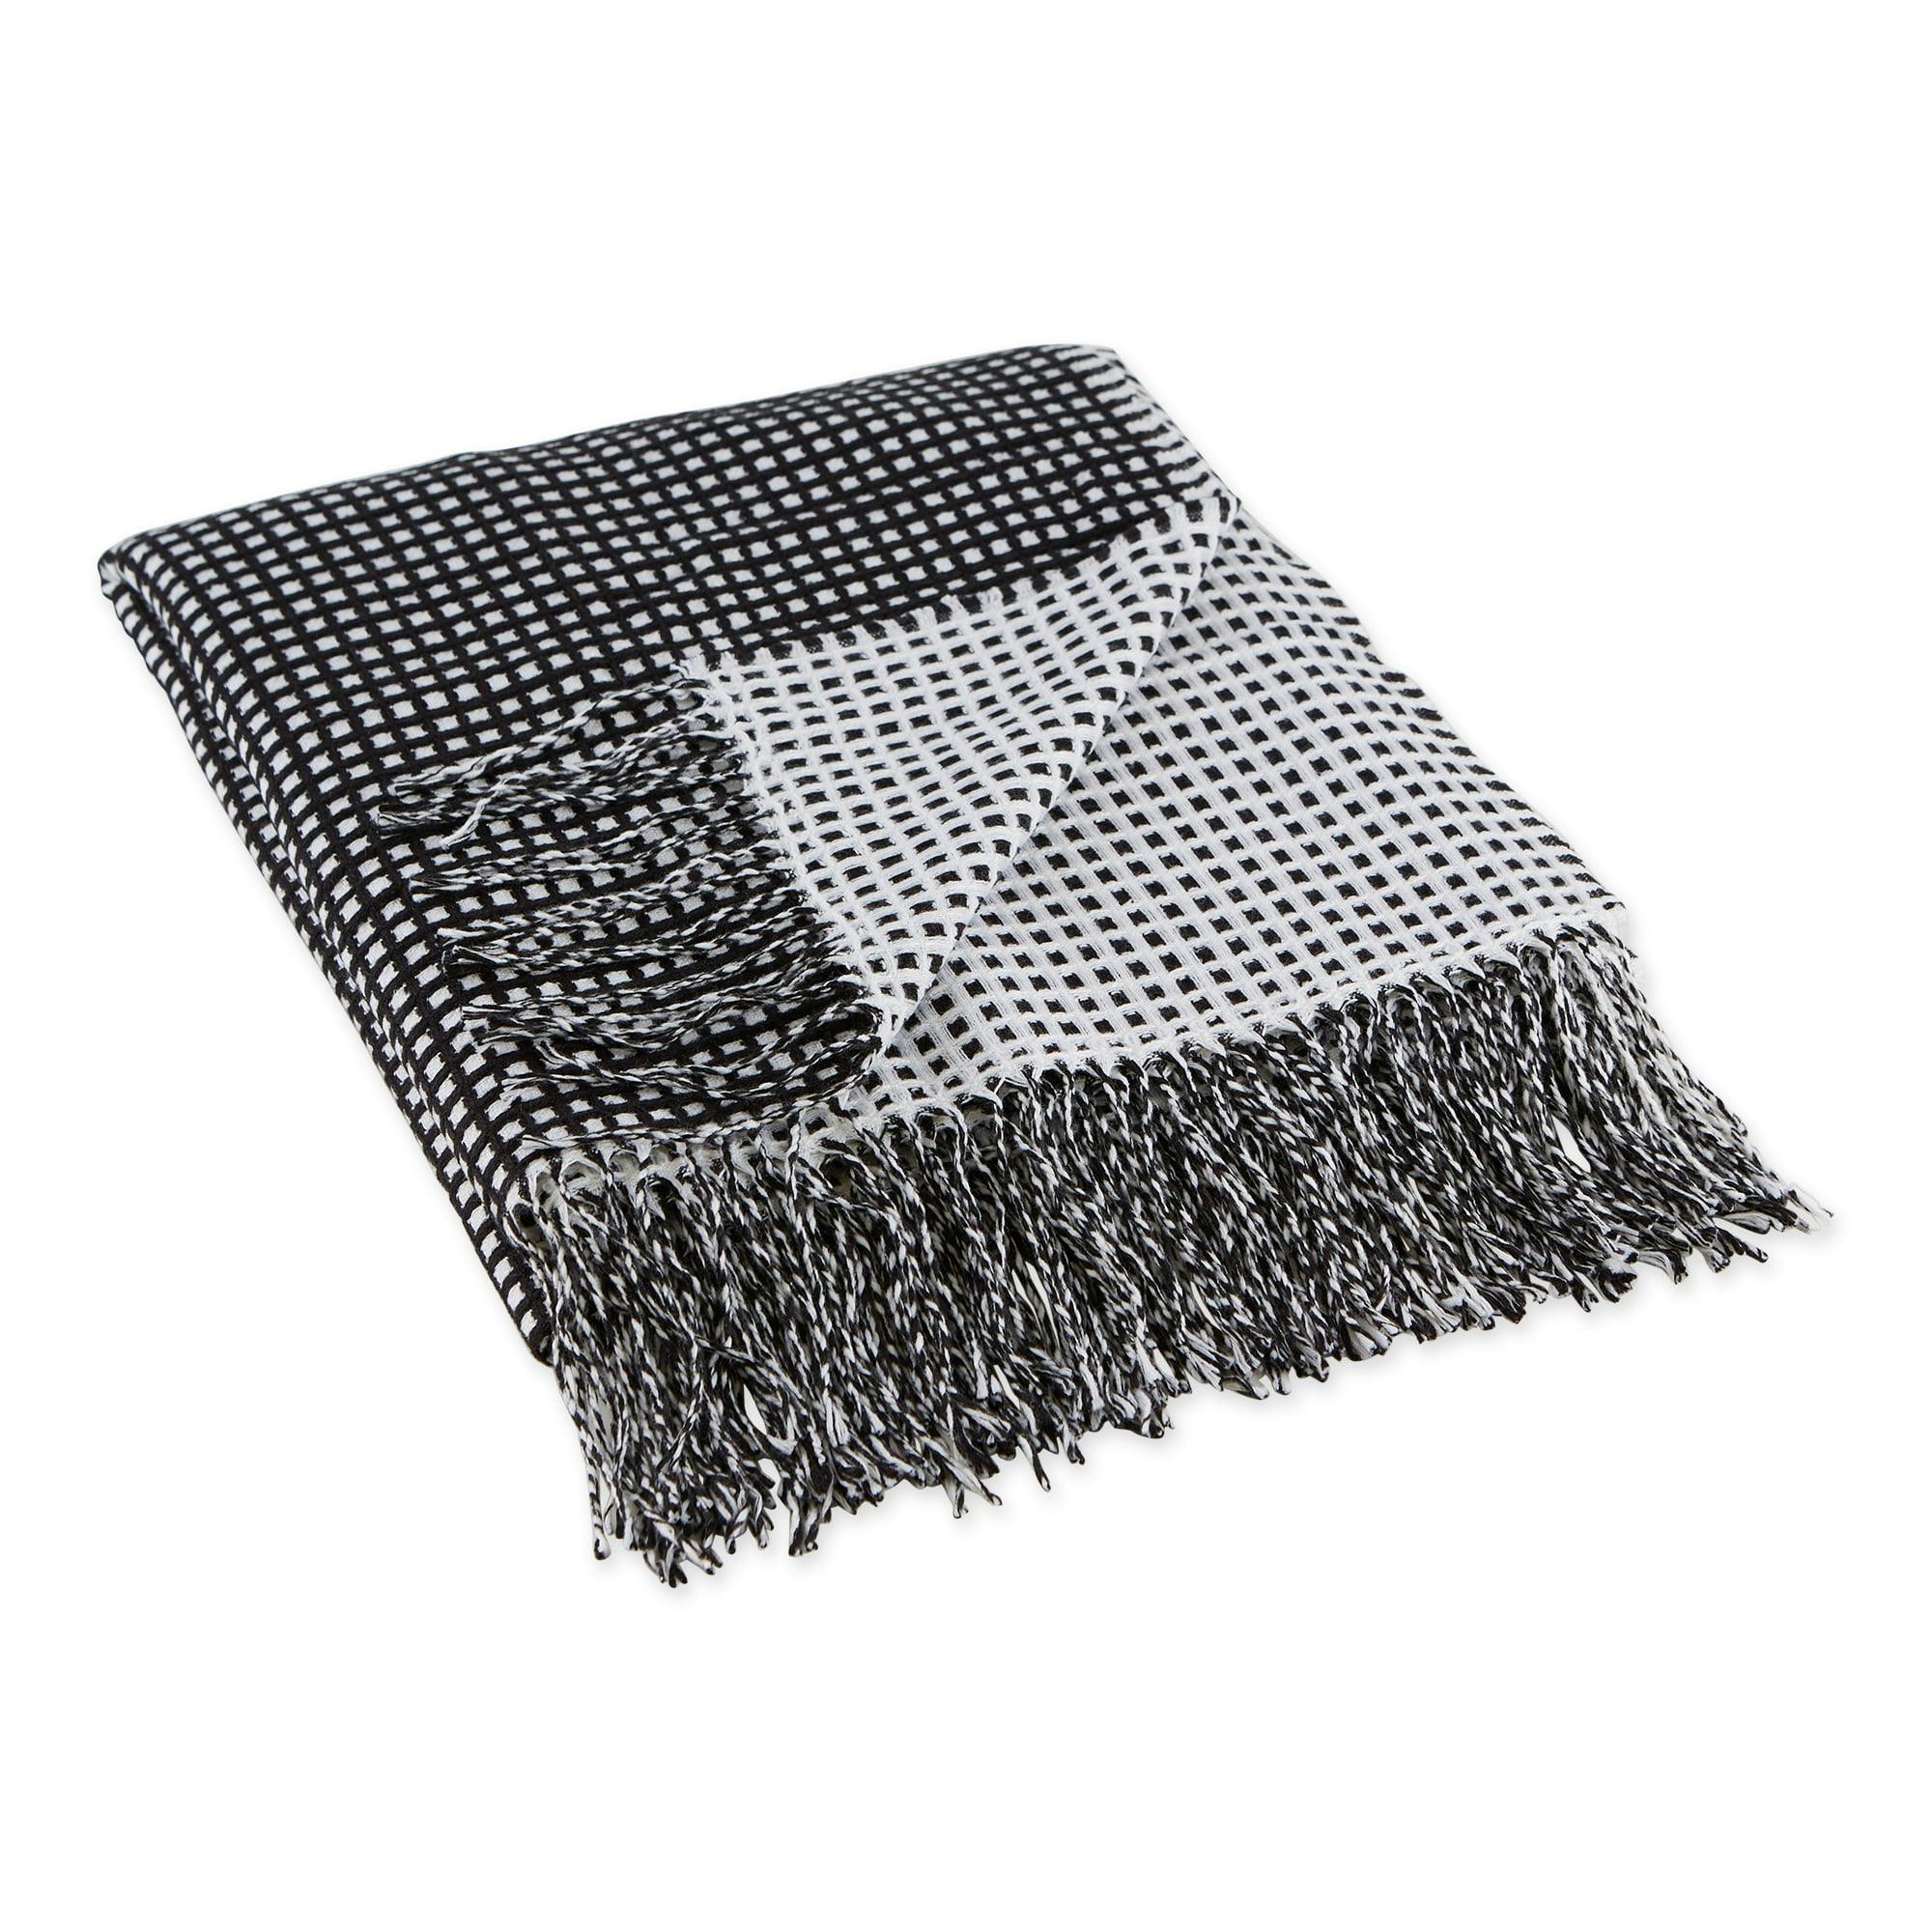 Chic Black & White Waffle Knit Acrylic Throw 50x60 inches